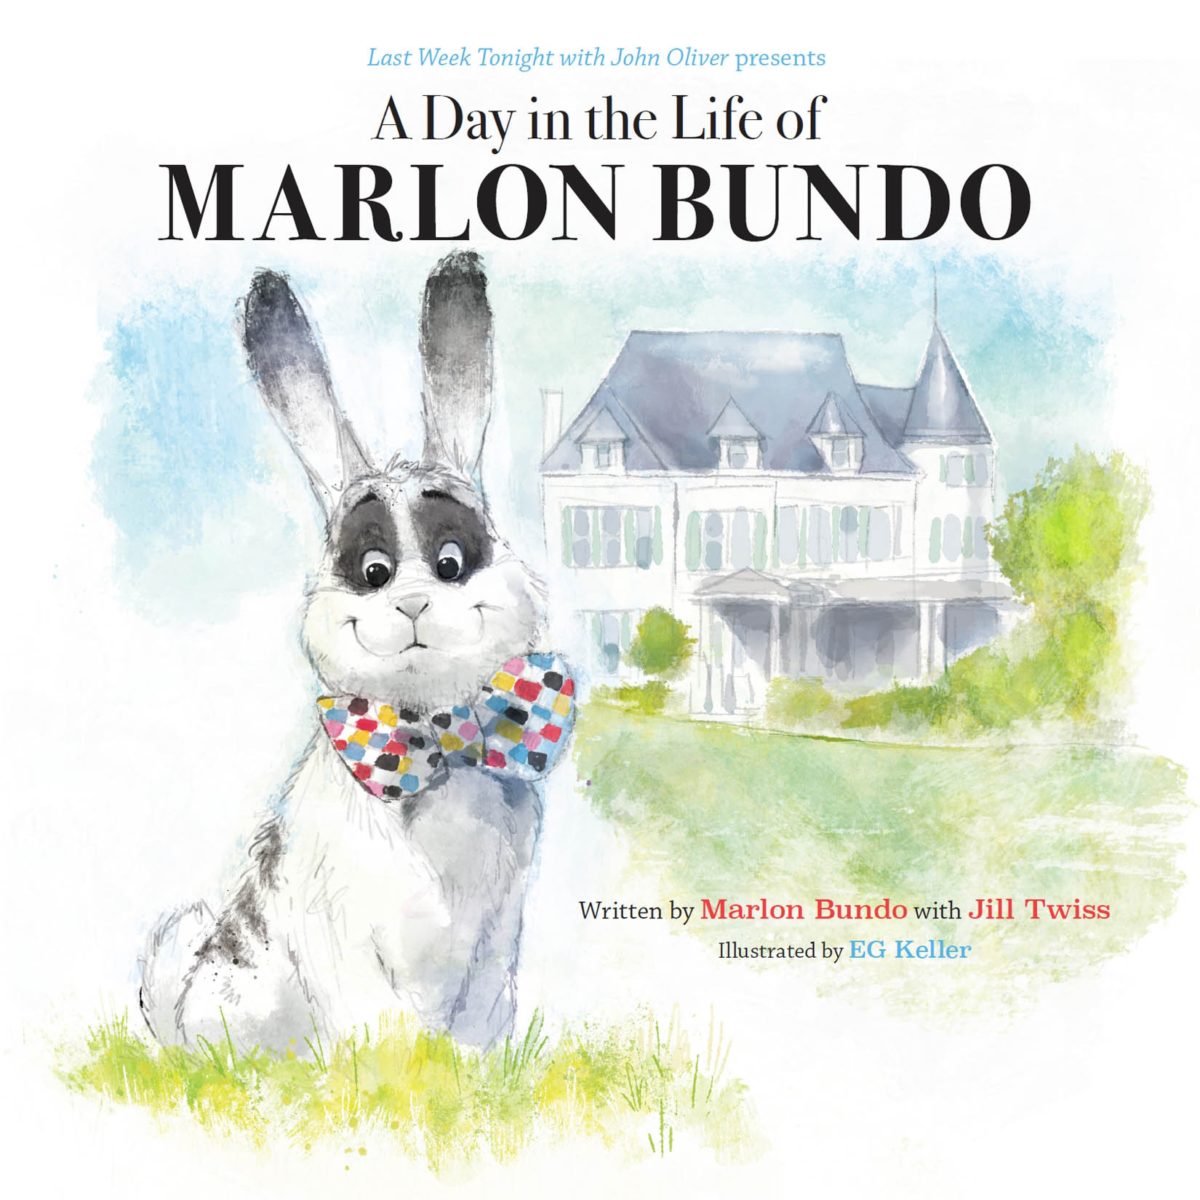 A Bunny of a KIDS book that TEACHS Love comes in all forms: Last Week Tonight with John Oliver Presents a Day in the Life of Marlon Bundo